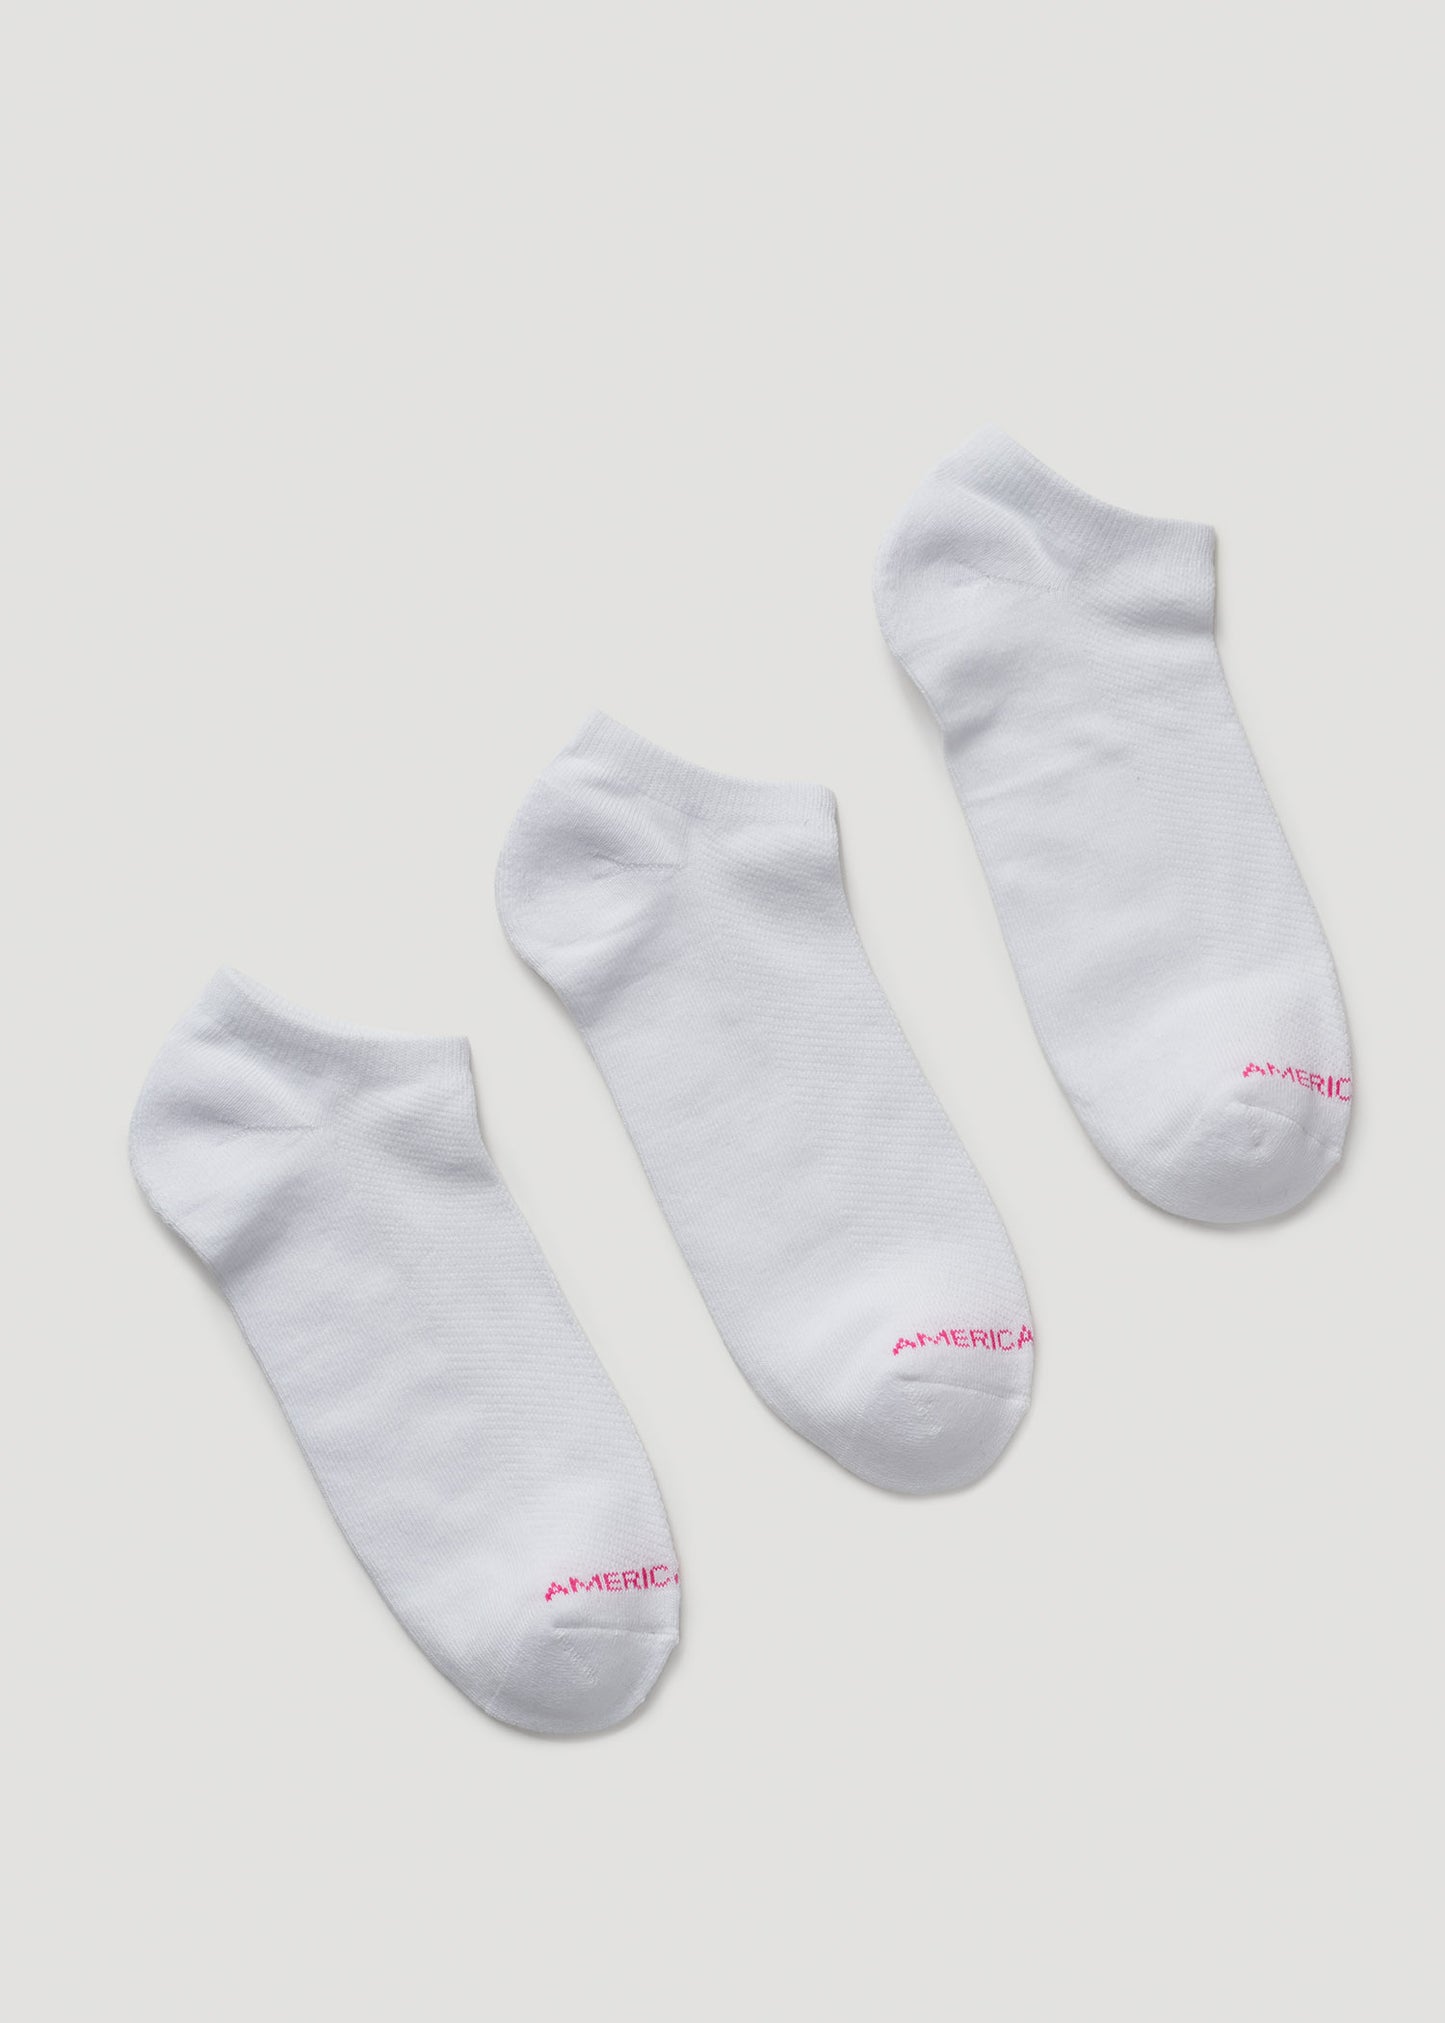 Women's Ankle Socks (X-Large Size: 10-13) | White 3 Pack – American Tall